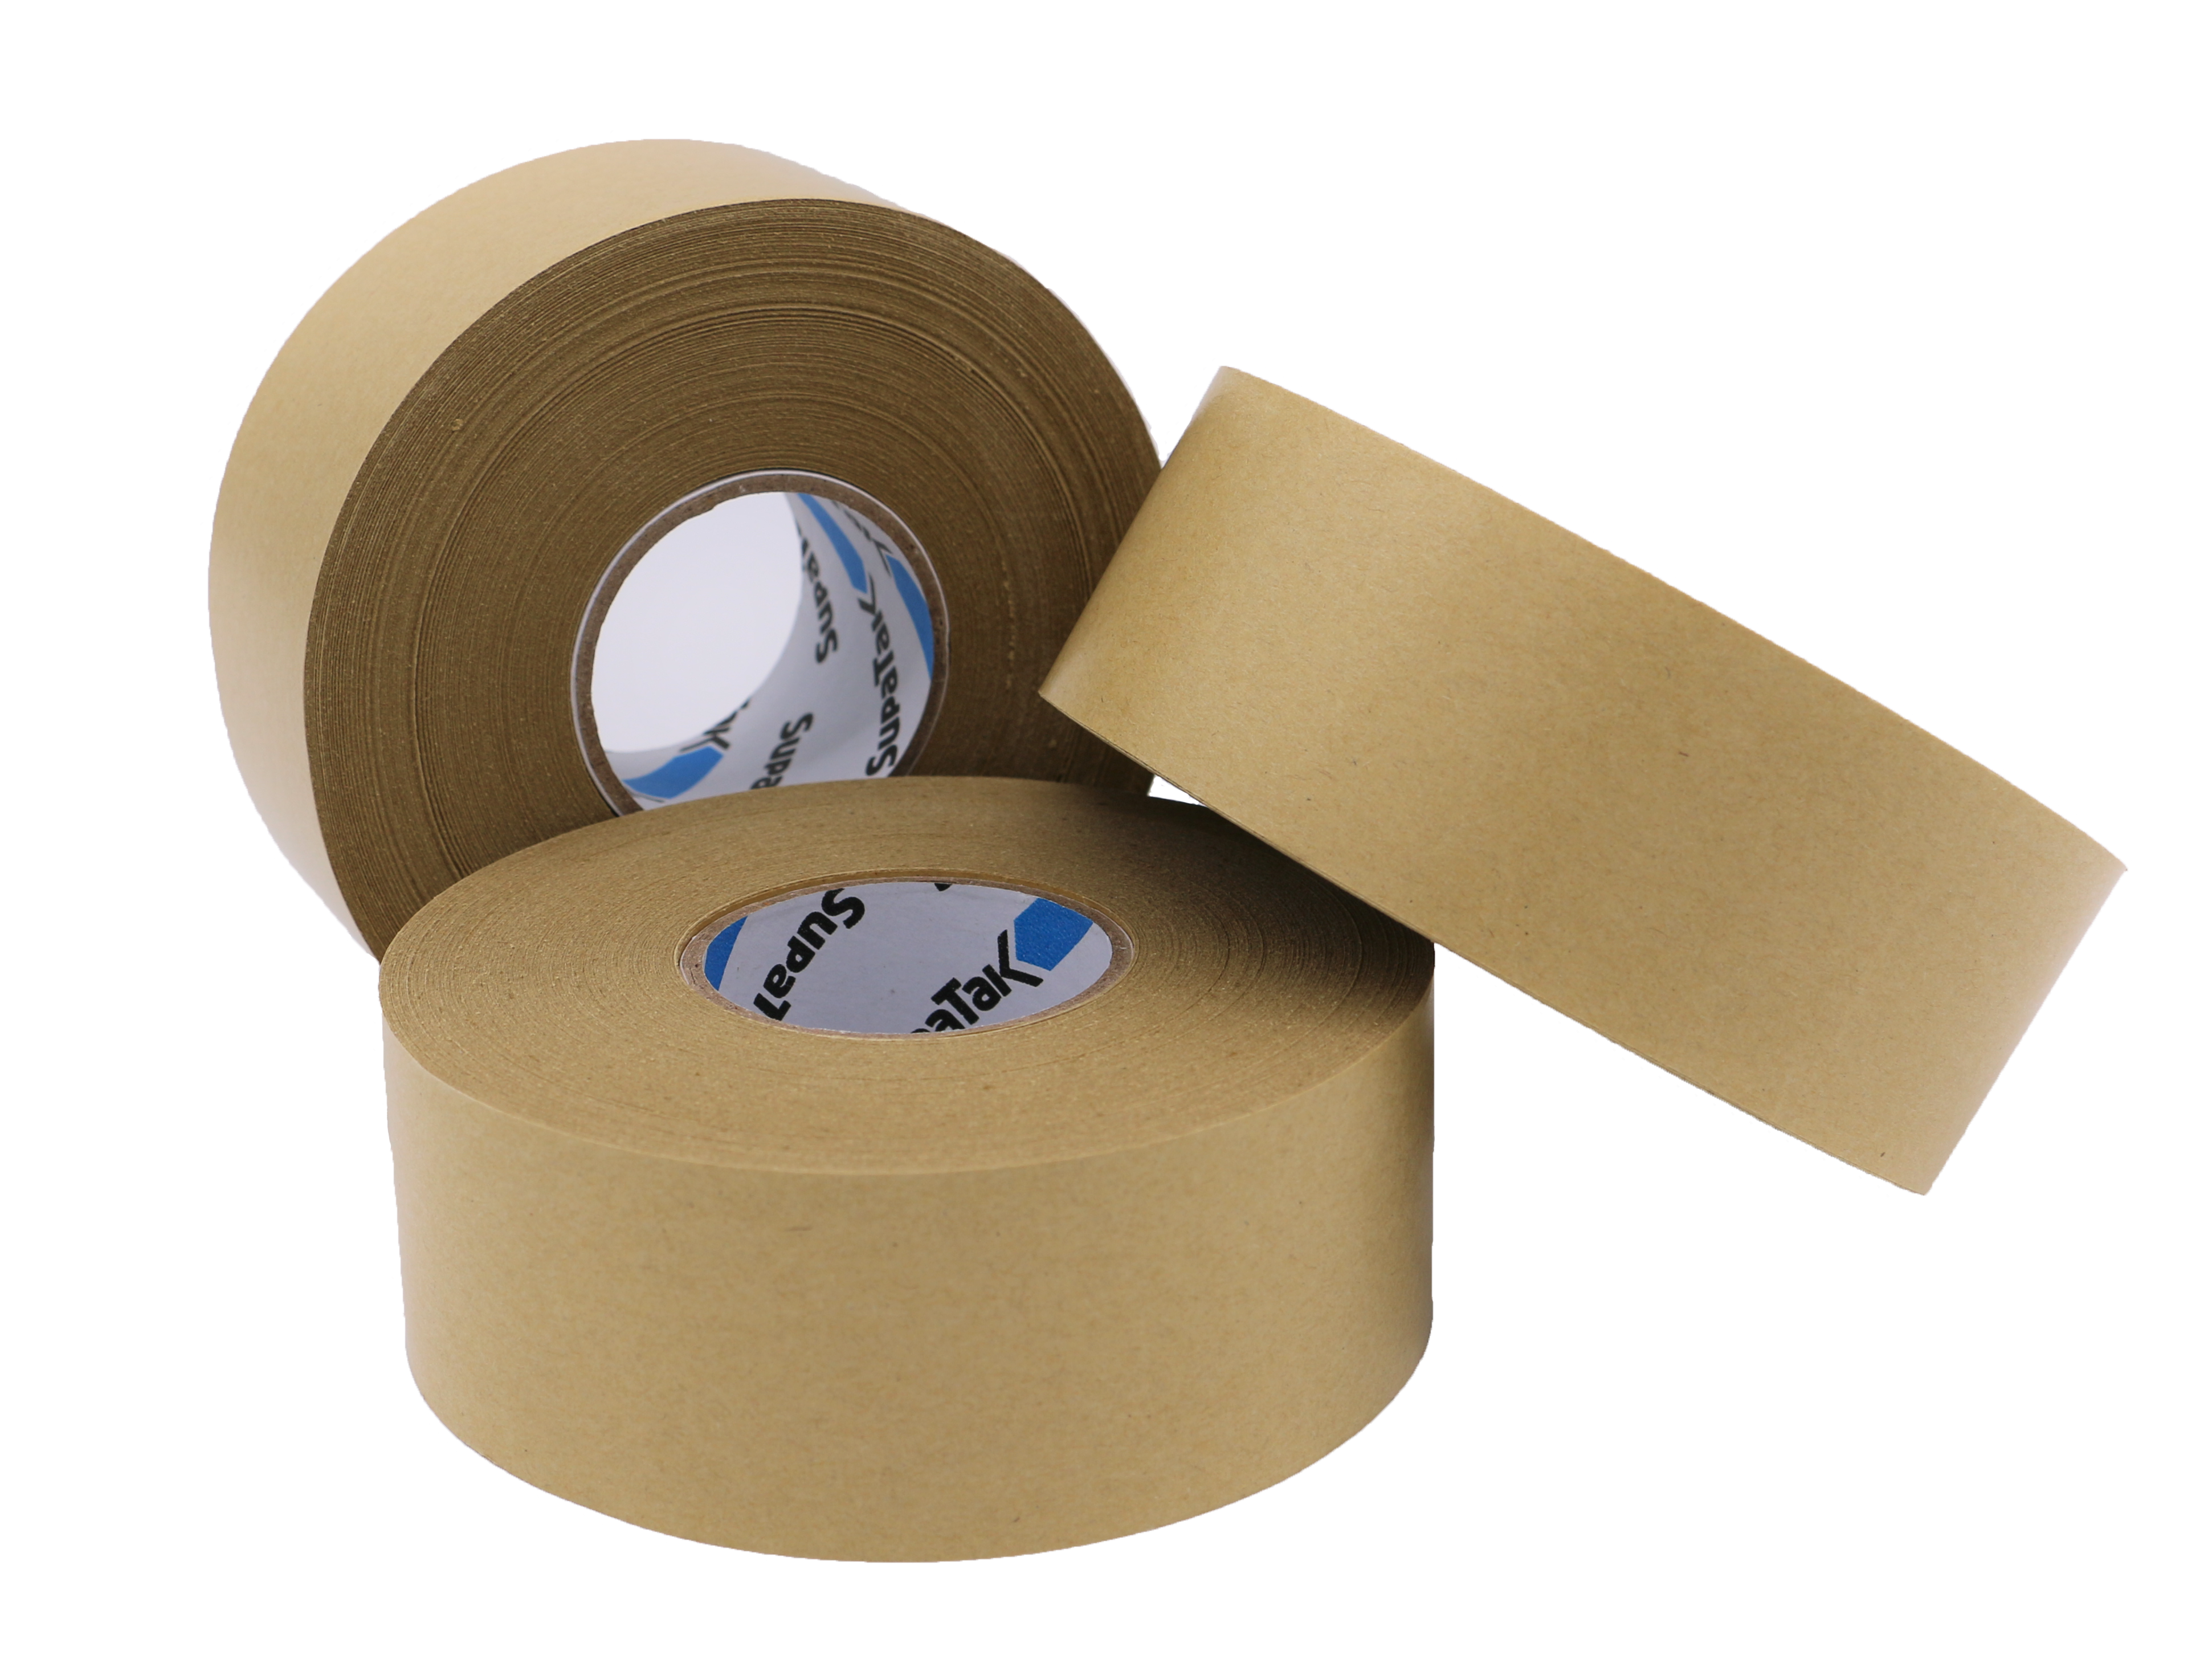 Tapes and Adhesives for a Variety of Different Applications